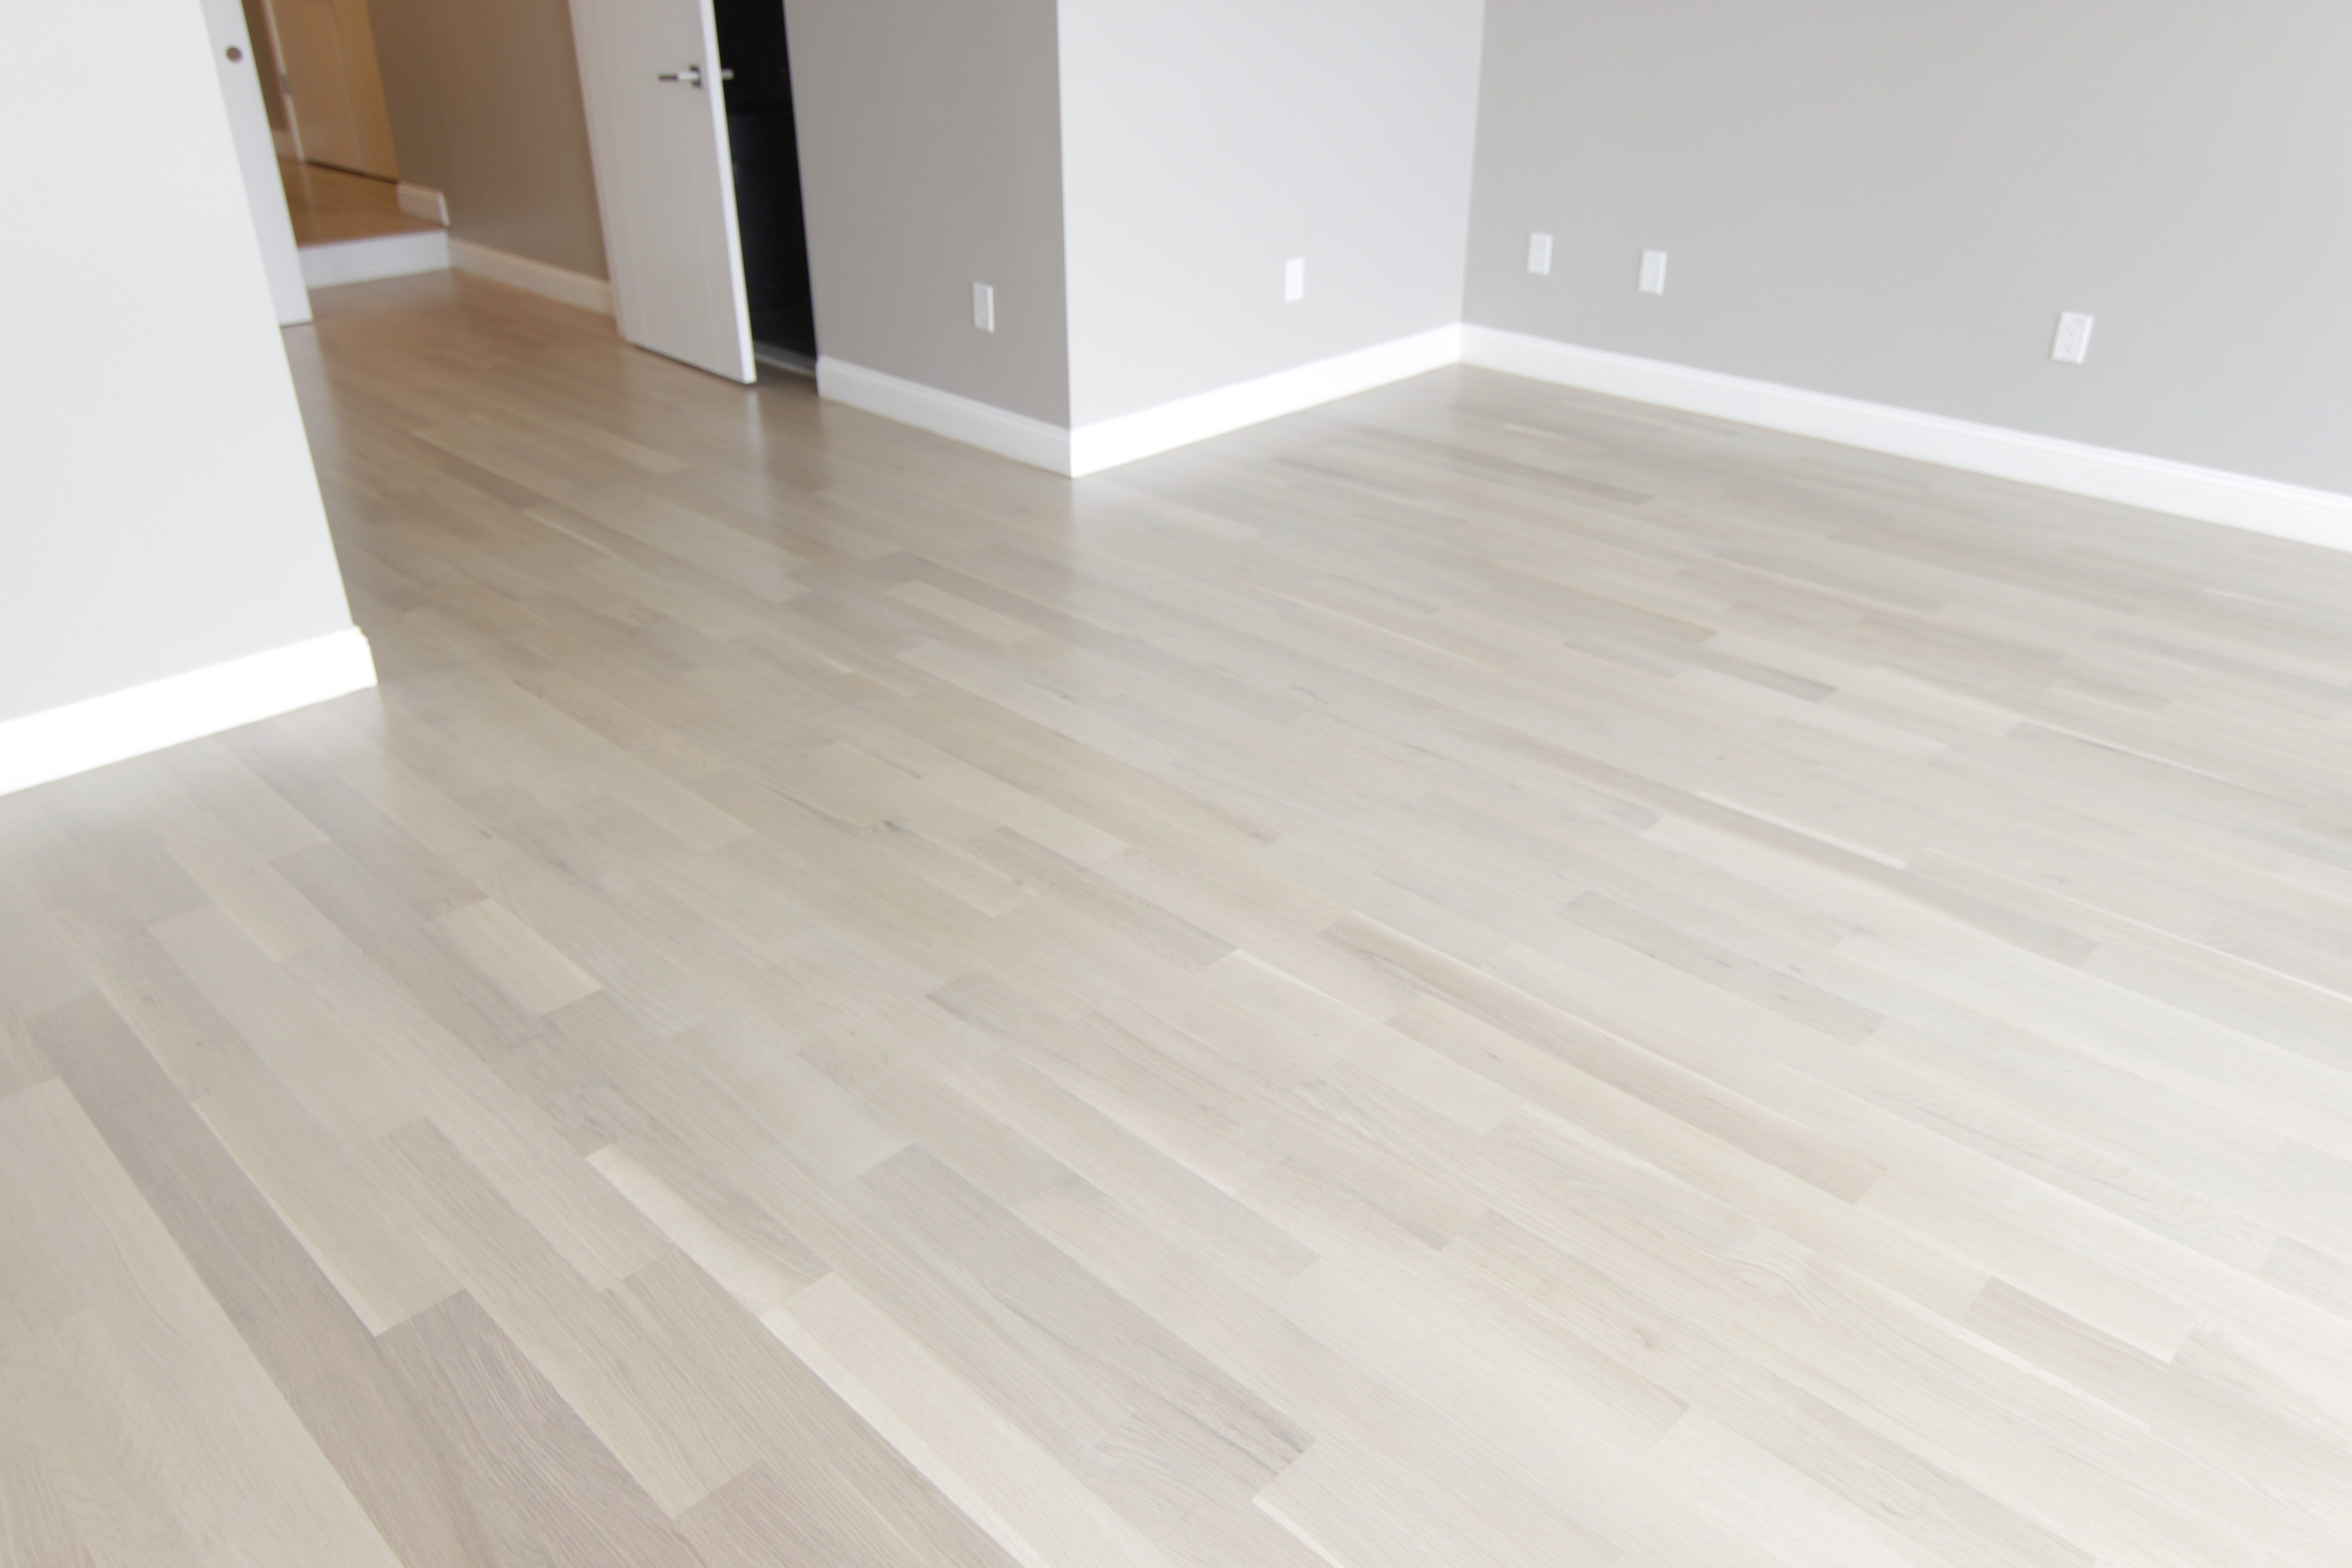 wickham hardwood flooring retailers of dont like the busy looking grain floors choose 4 select better intended for 1156a4c4cfd19824100b857513f0fc6c